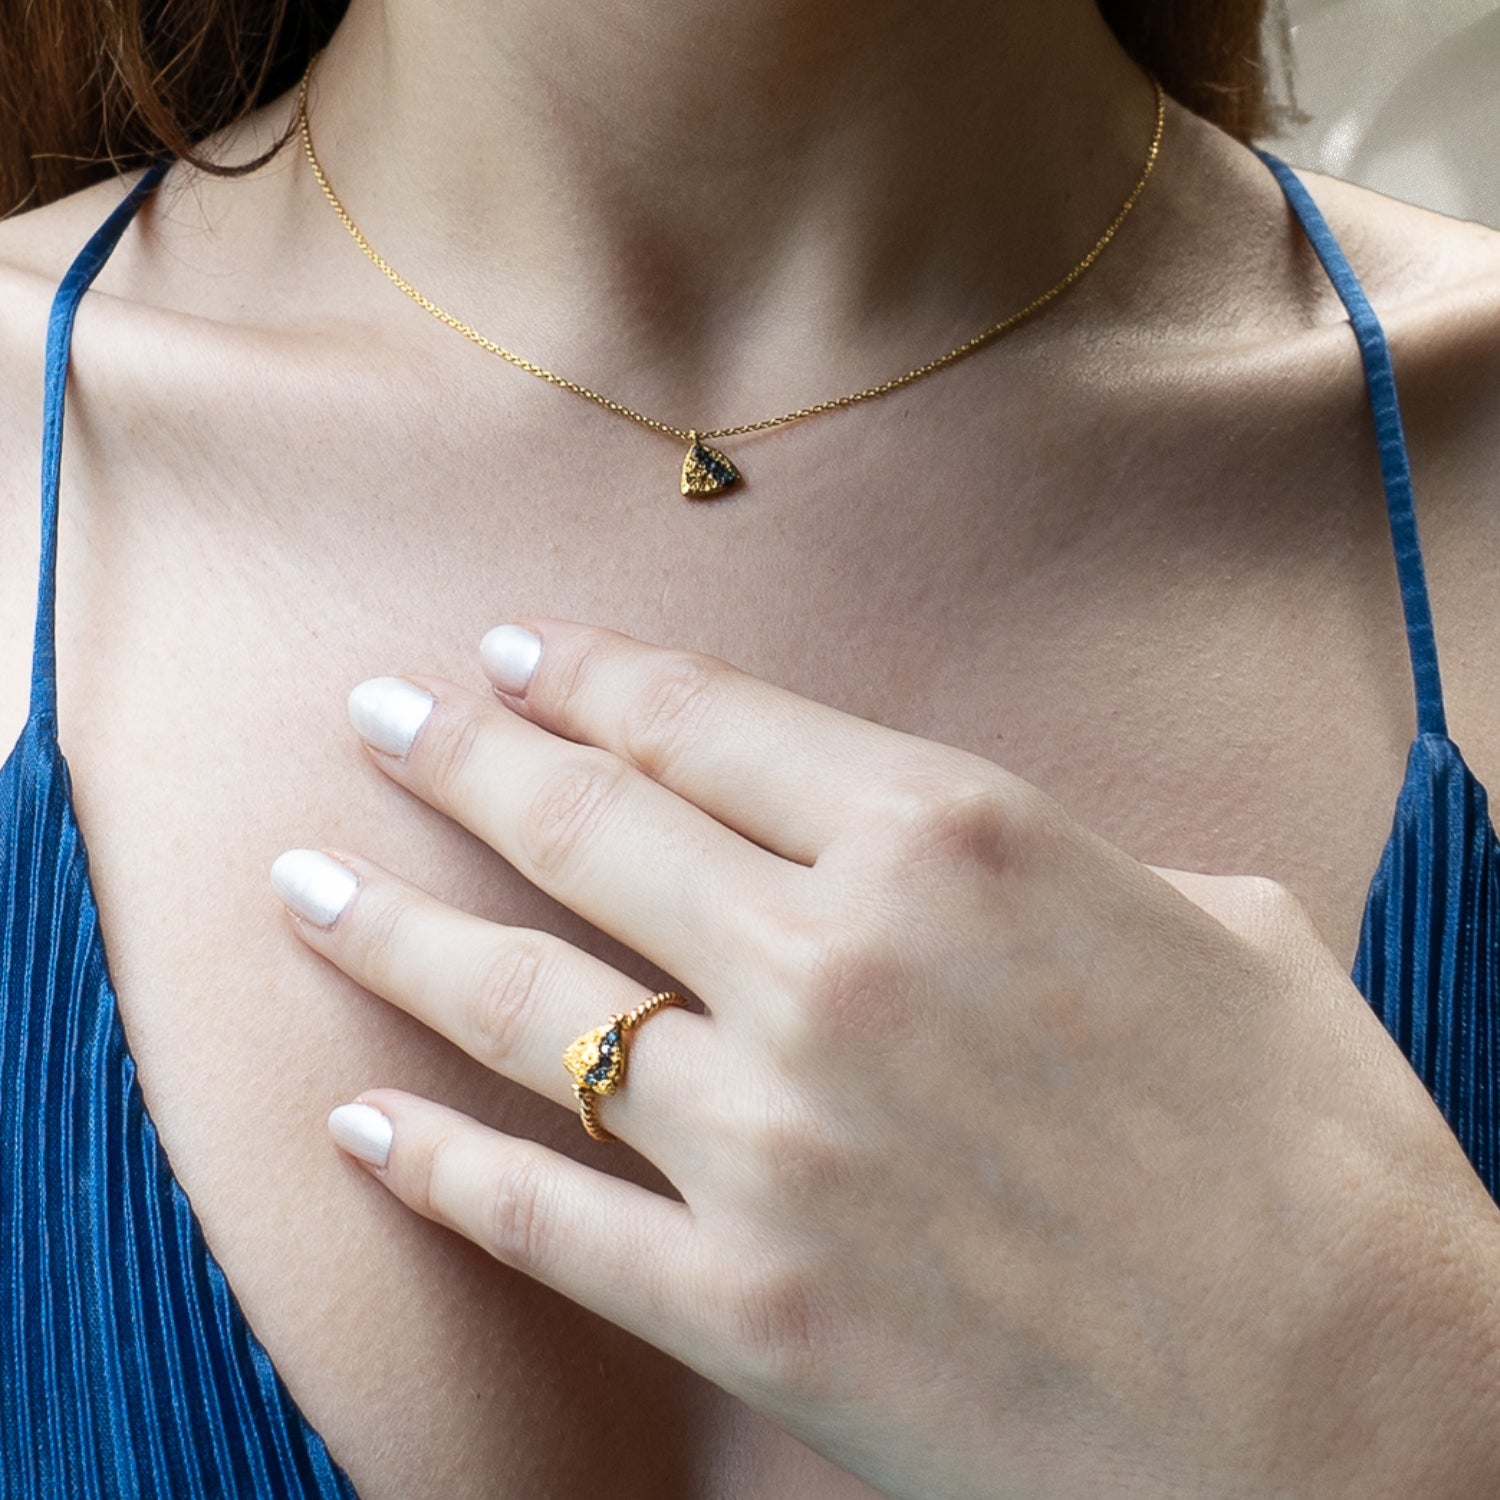 Model Wearing Nature Triangle Gold Diamond Necklace - Elegant and captivating on any neckline.